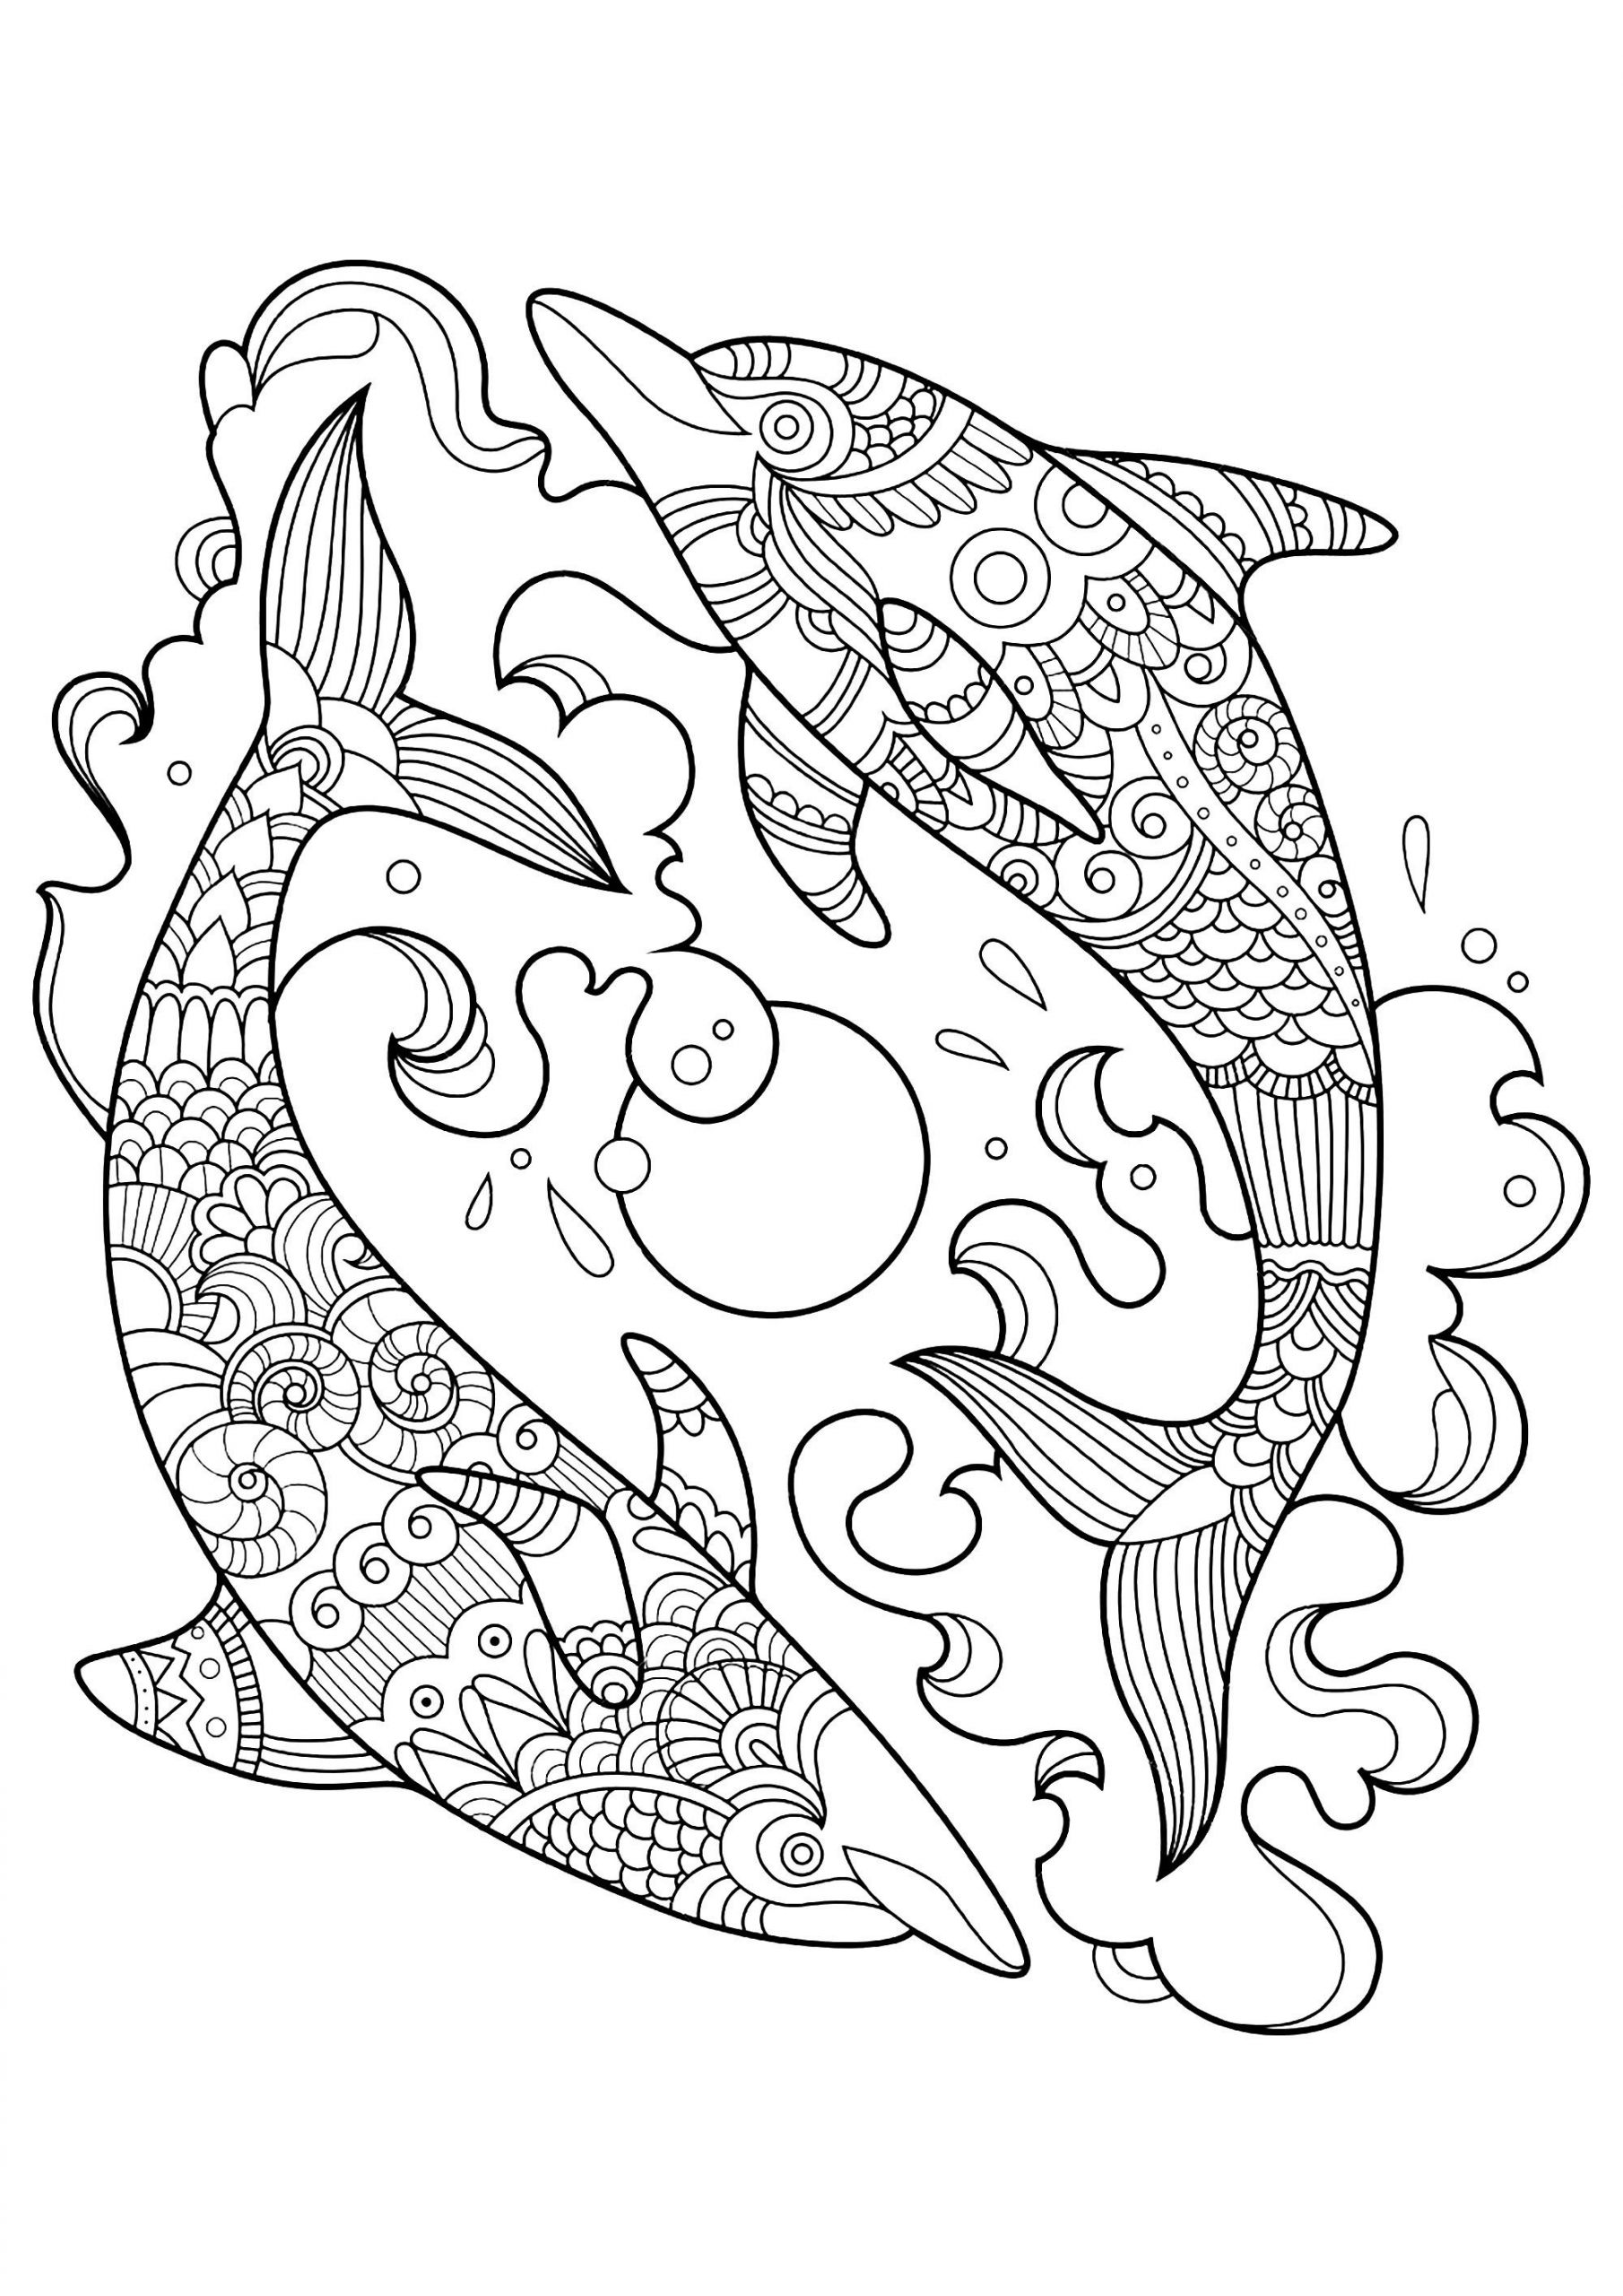 Dolphin Coloring Pages For Kids
 Dolphins to color for children Dolphins Kids Coloring Pages